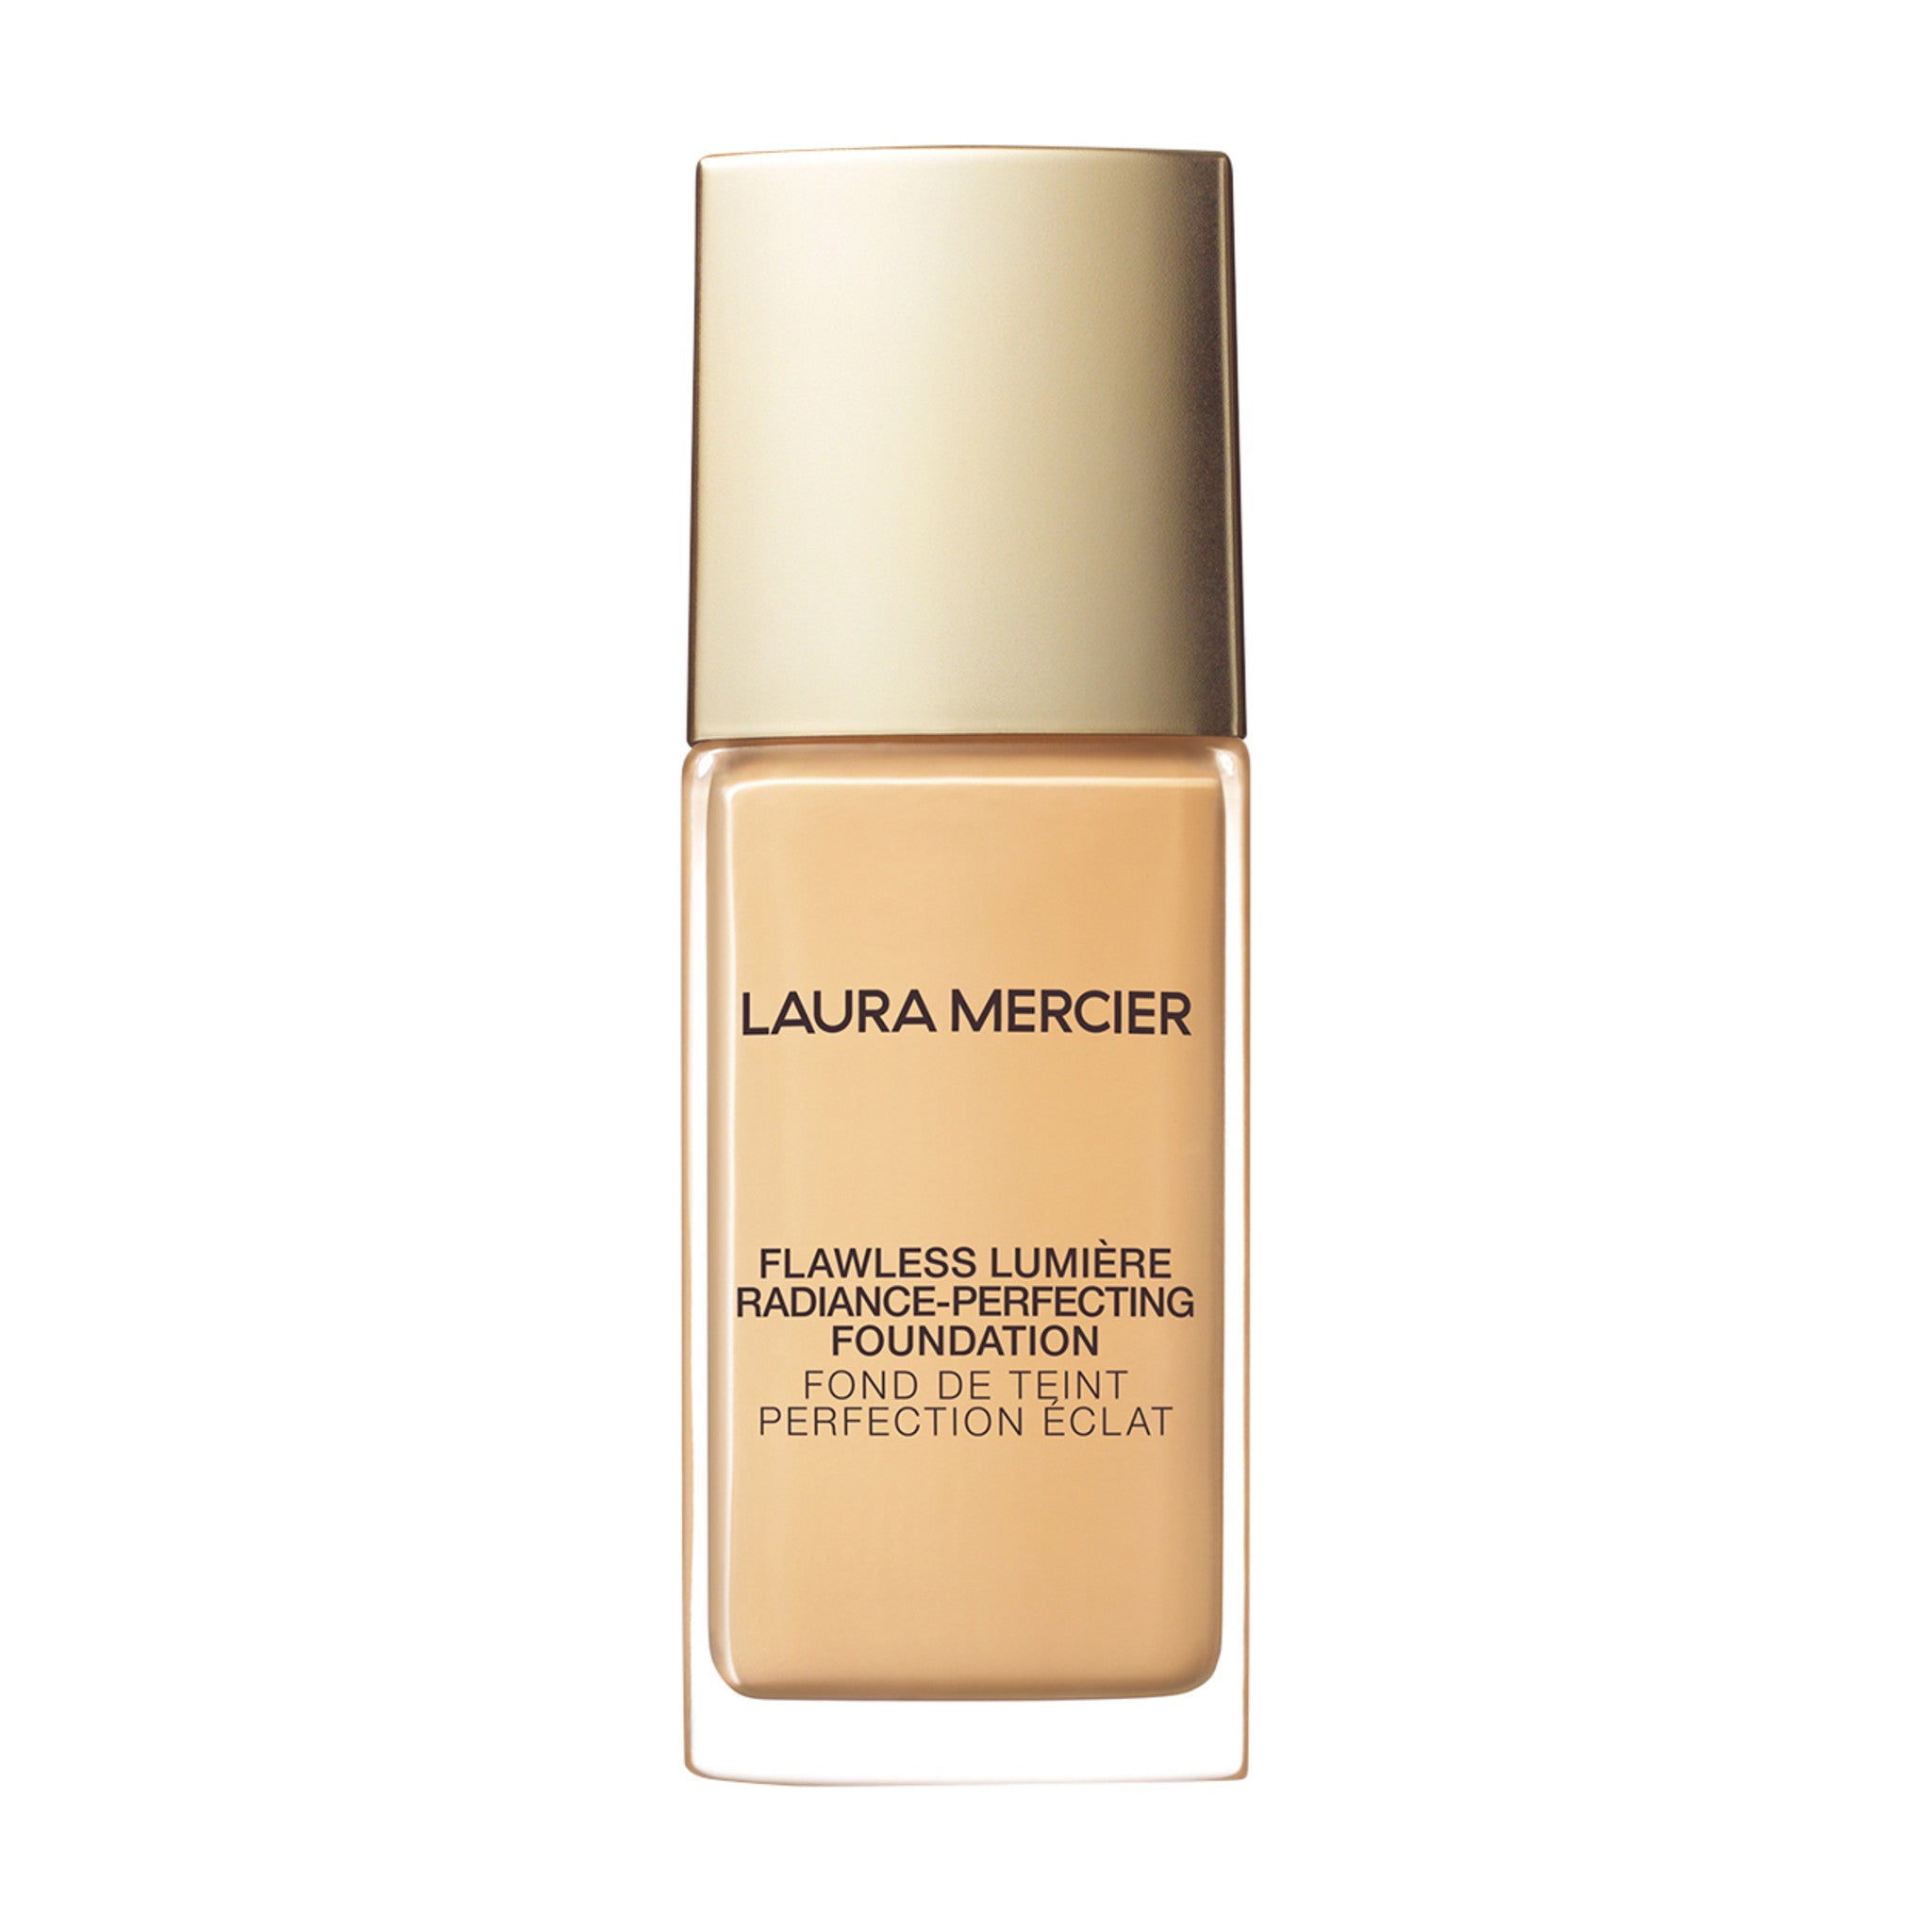 Laura Mercier Flawless Lumière Radiance-Perfecting Foundation Color/Shade variant: 1C1 SHELL main image. This product is for light complexions